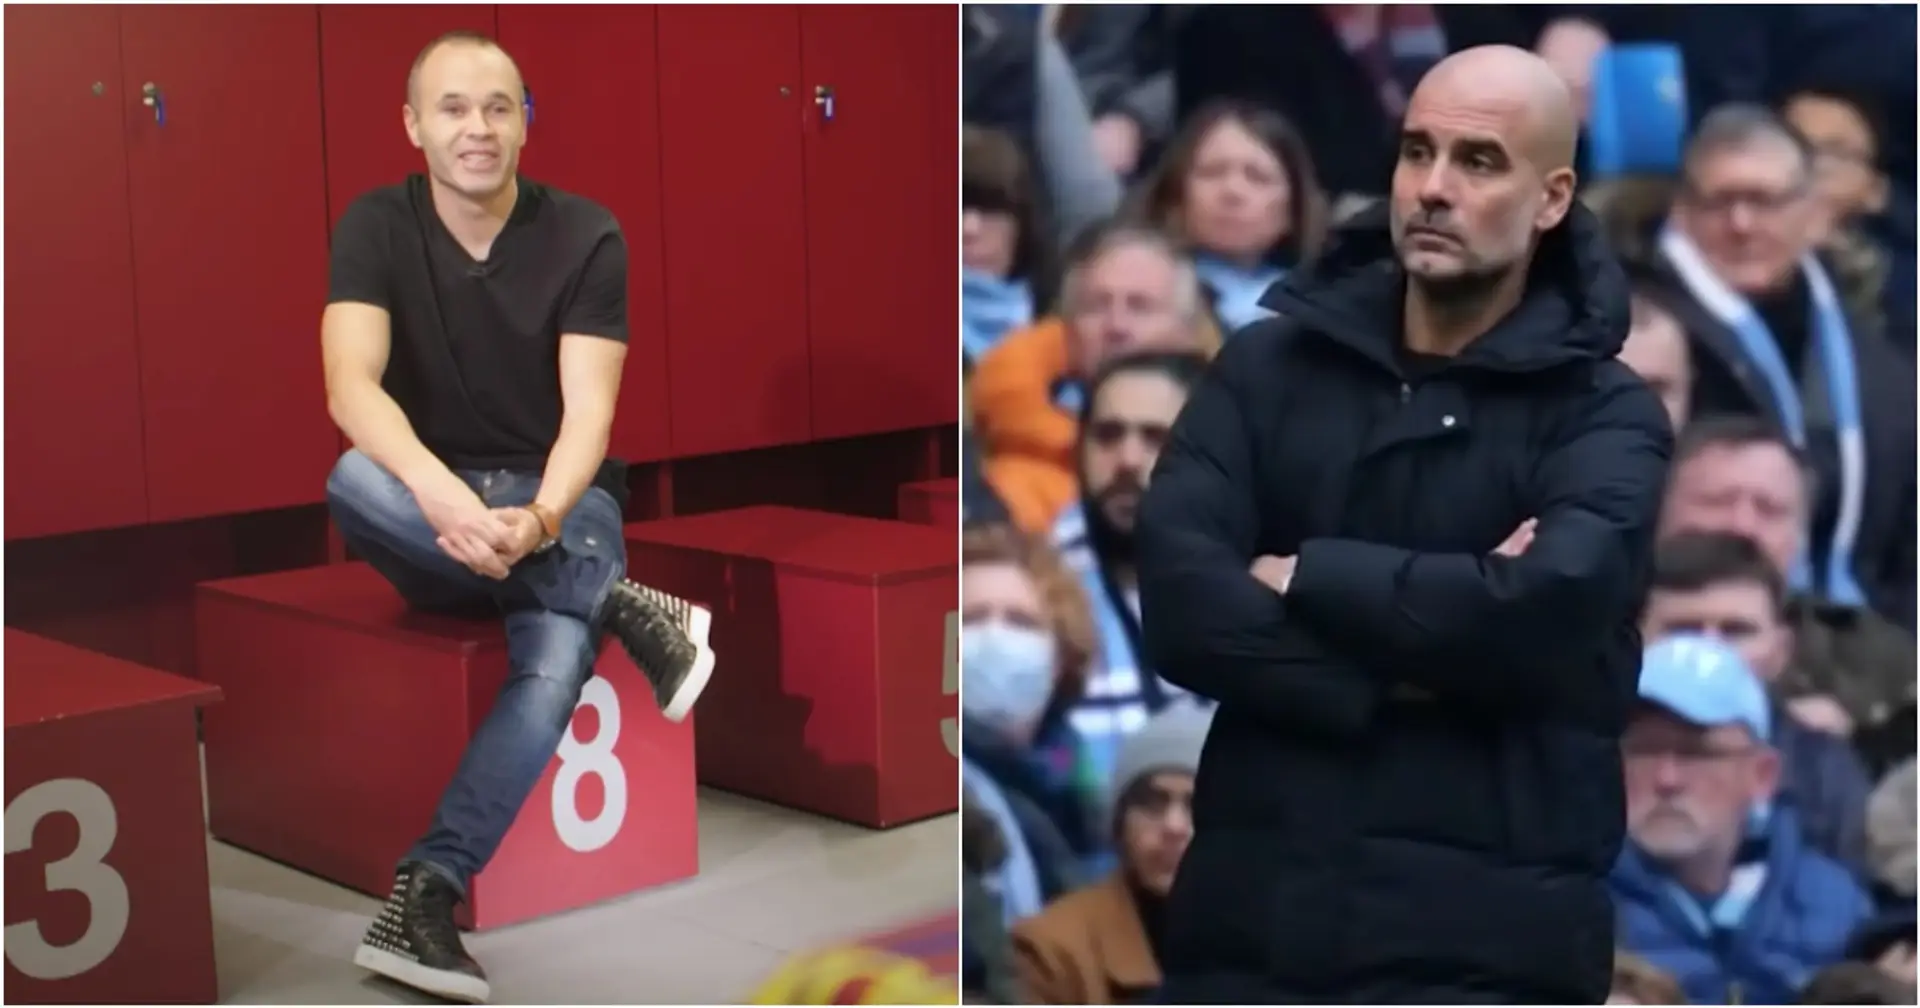 'Pep knows what I think': what Iniesta said when asked if Guardiola could tempt him to join Man City